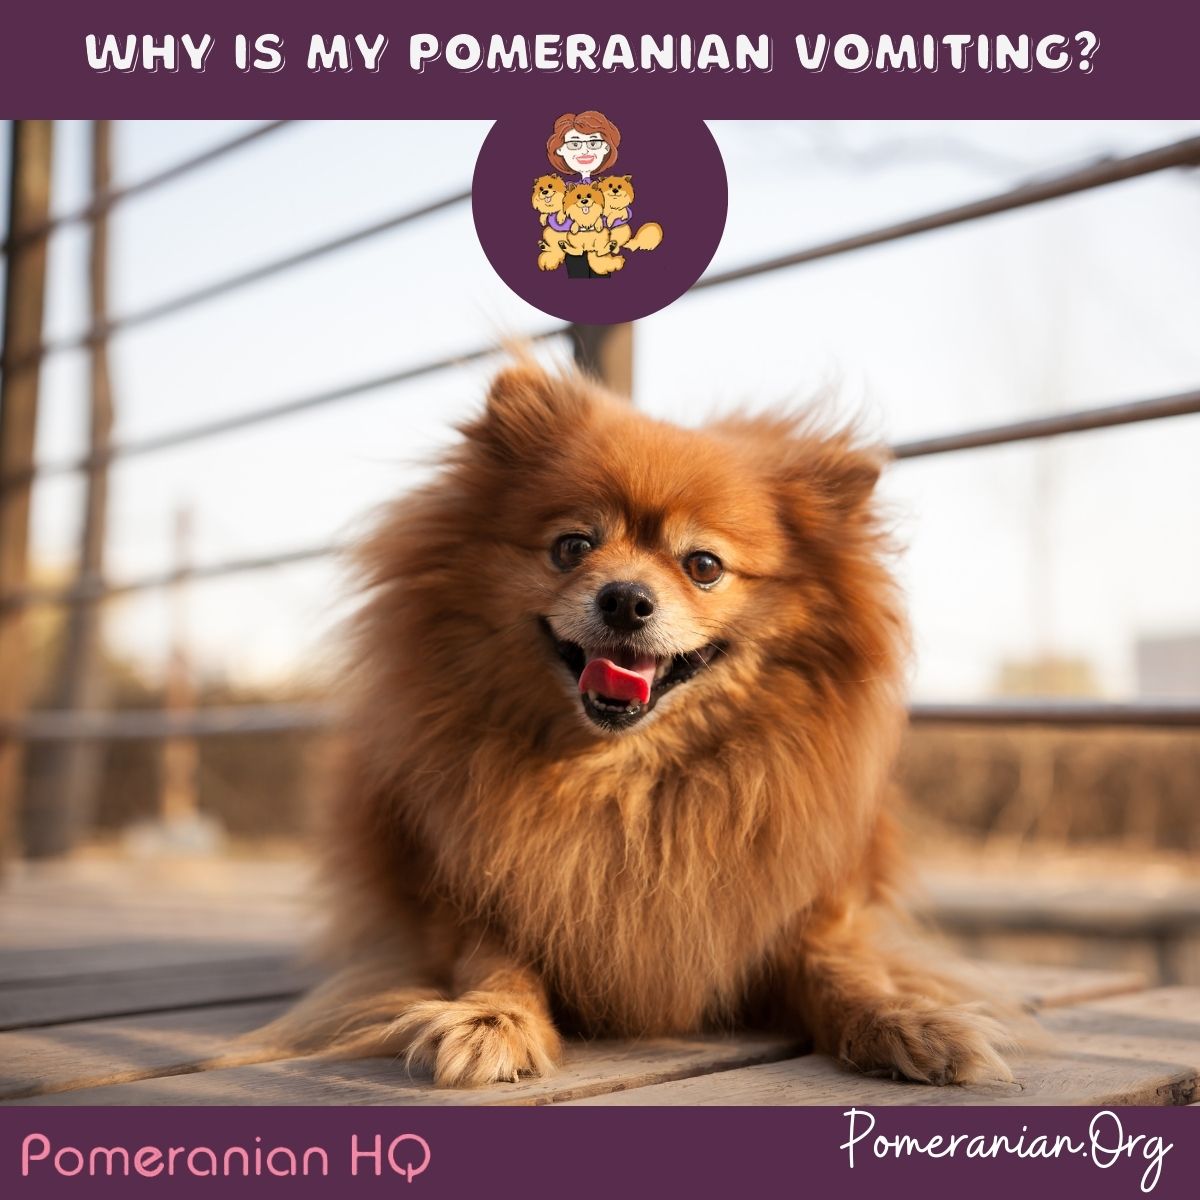 Why is my Pomeranian vomiting?